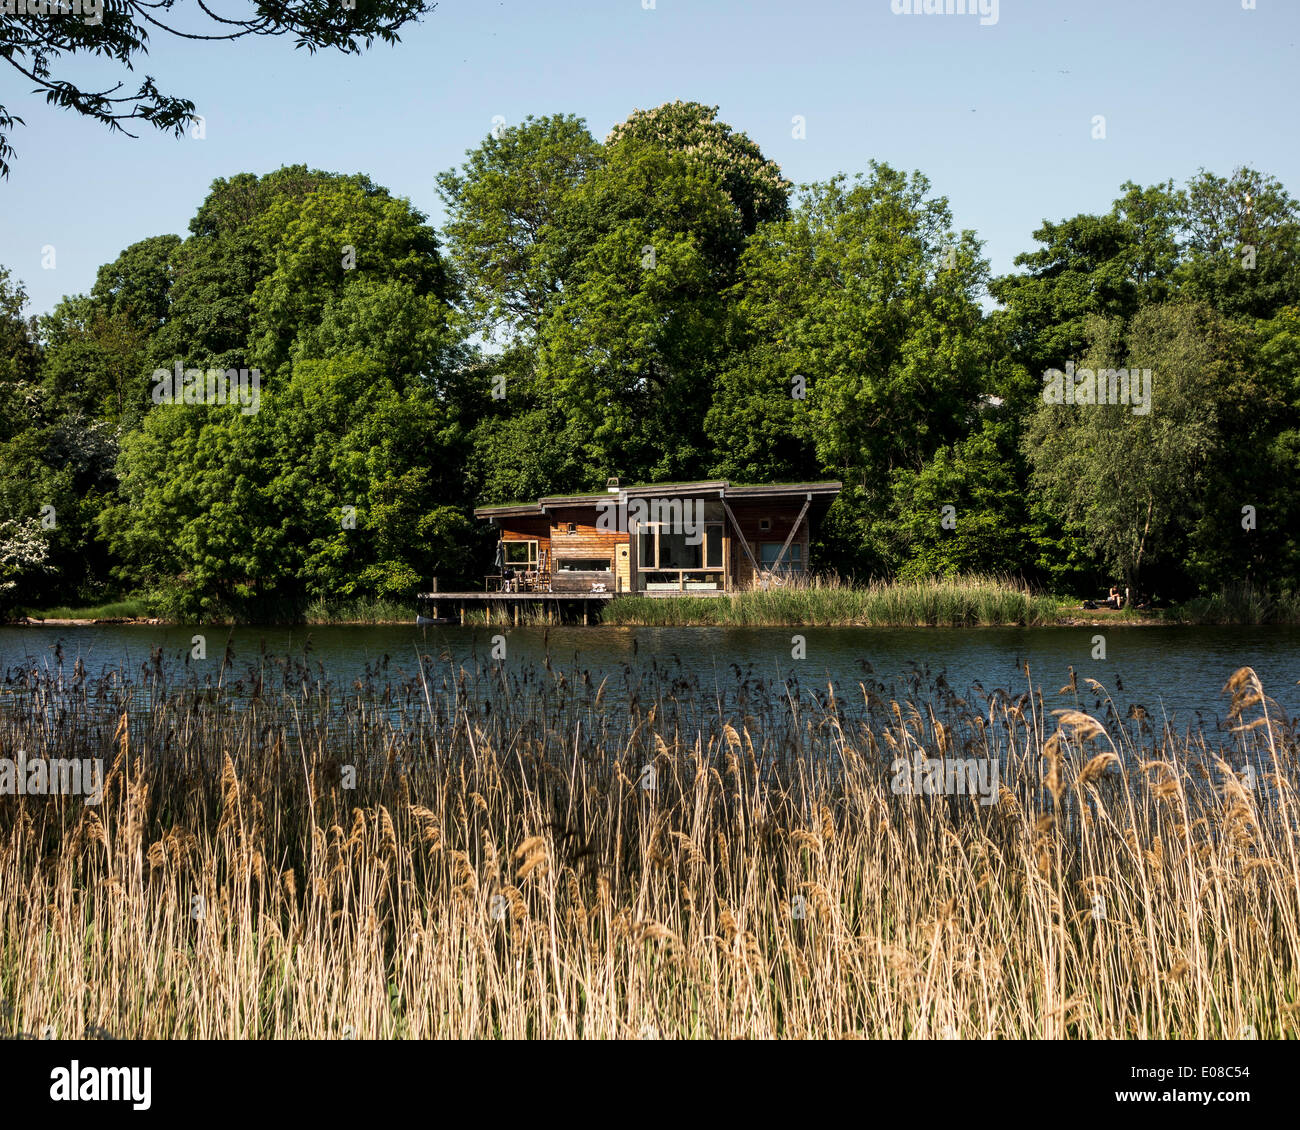 Christiania, Copenhagen, Denmark. Architect: Unknown, 1971. House by the lake in Christiania. Stock Photo